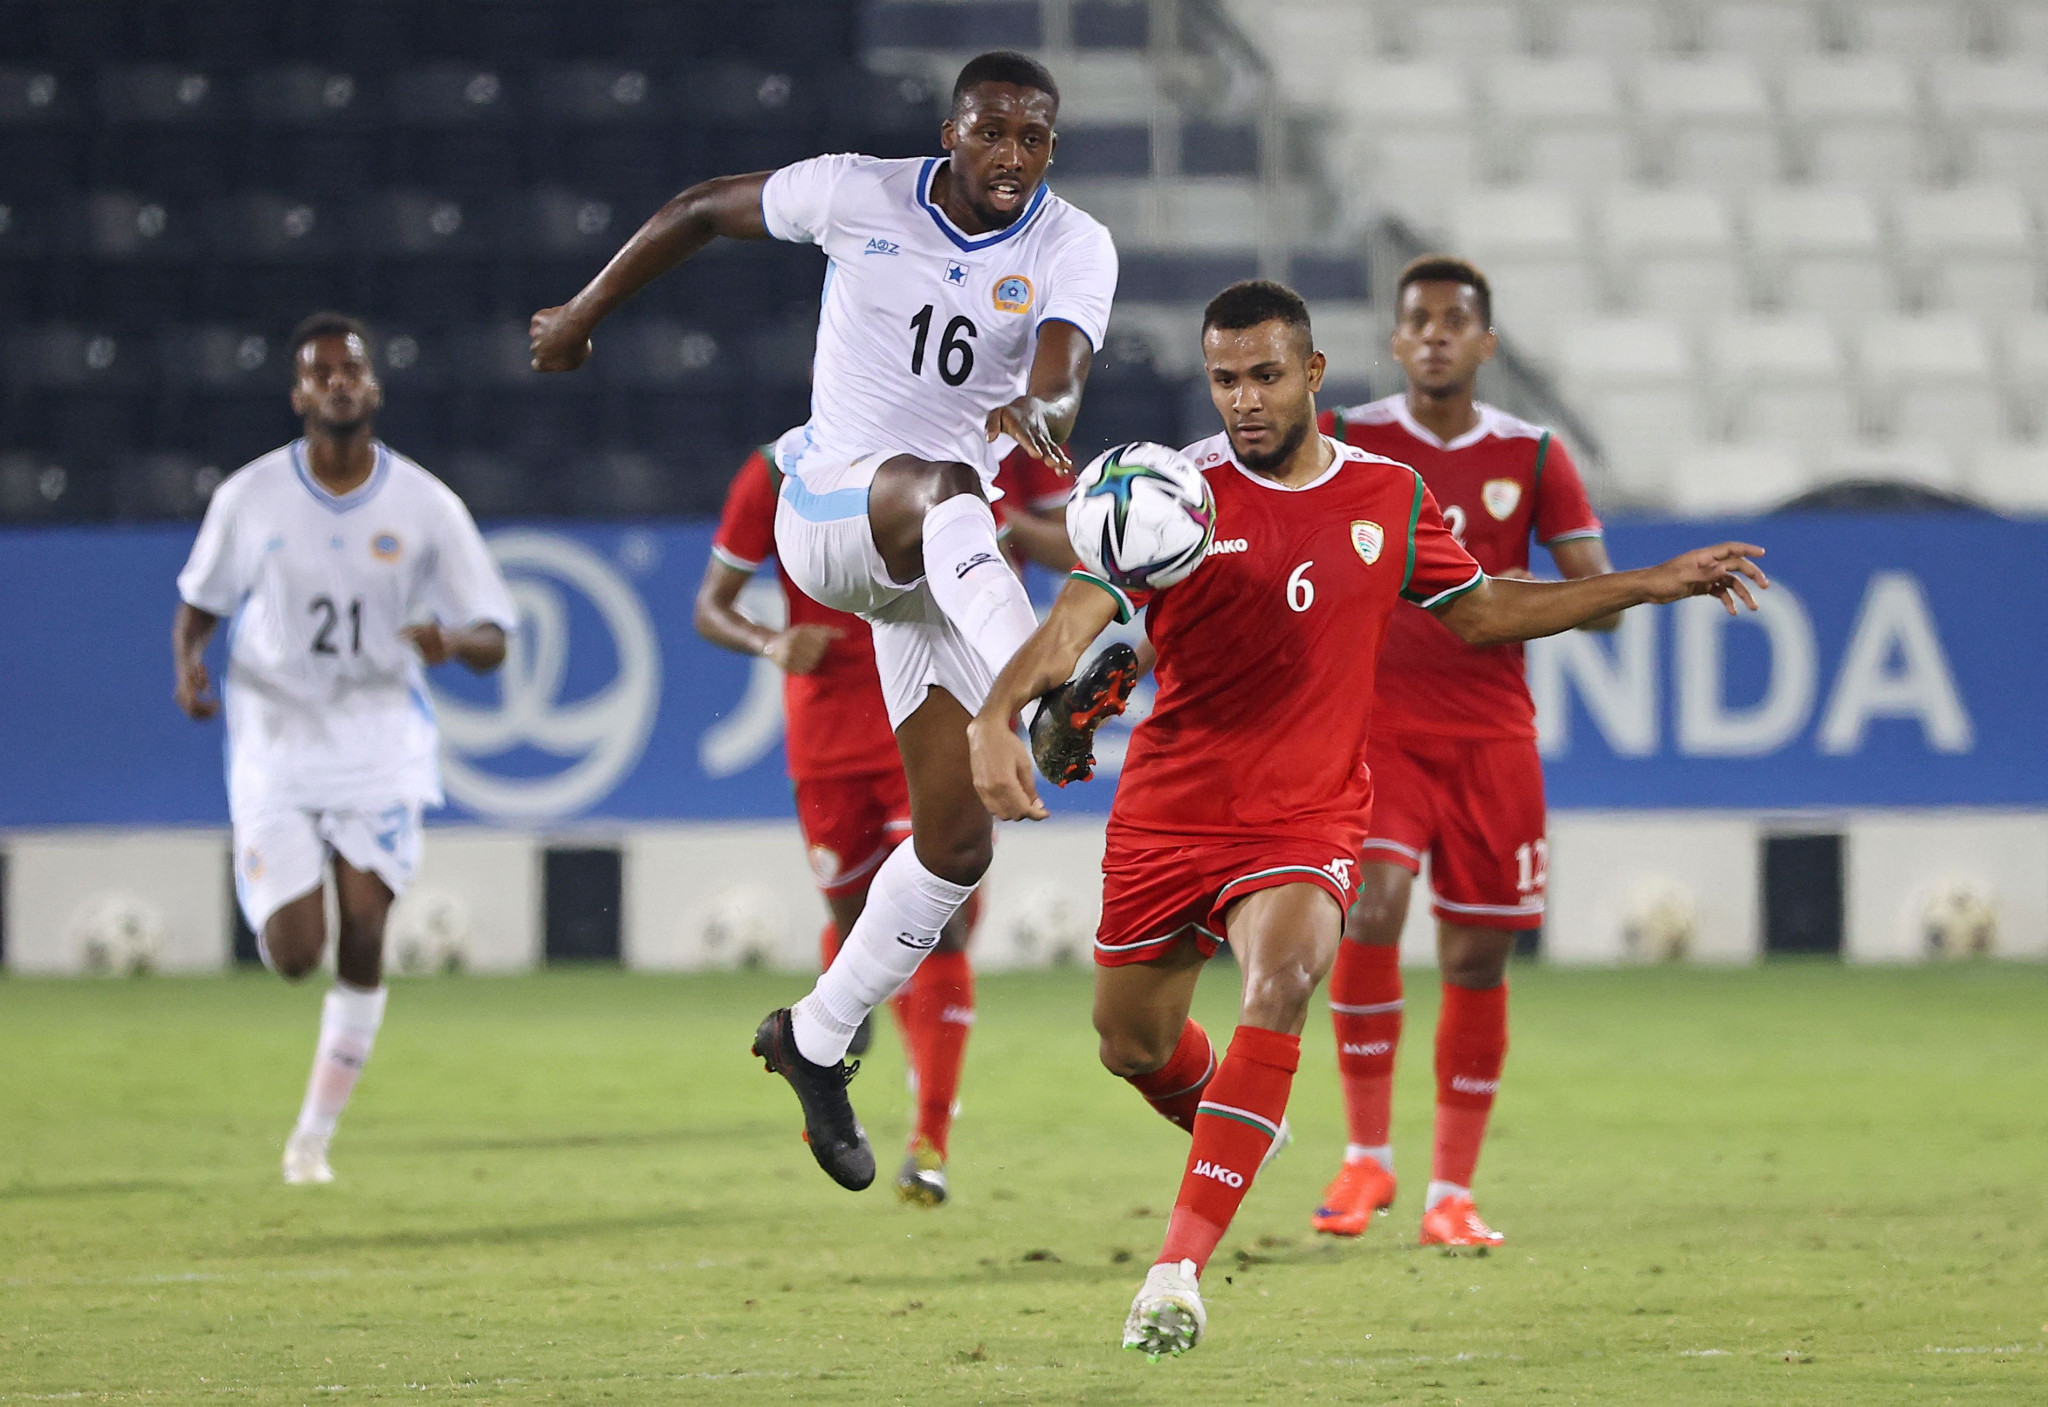 Somalia have not found success in football, with their senior national team being ranked 204th in world according to FIFA Rankings ©Getty Images